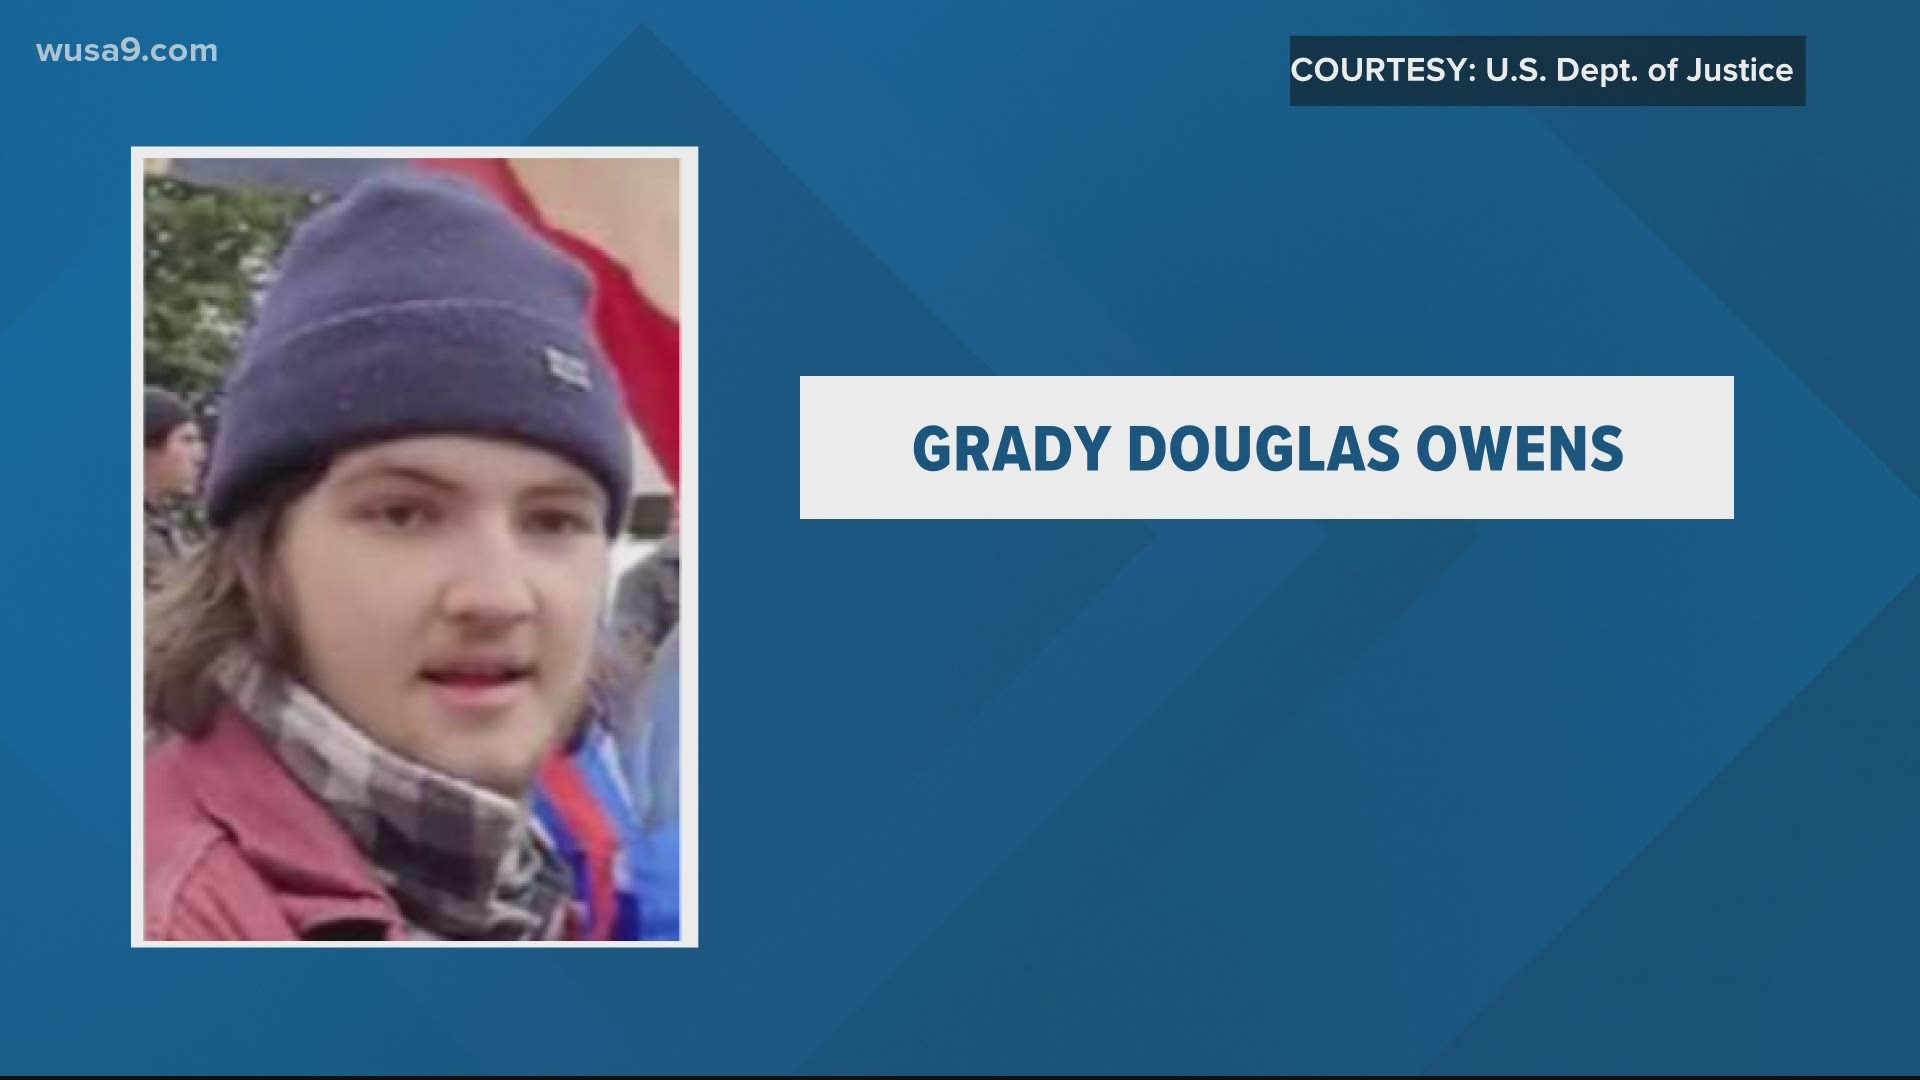 Grady Douglas Owens, 21, of Florida, is asking to be released from jail while he awaits trial.